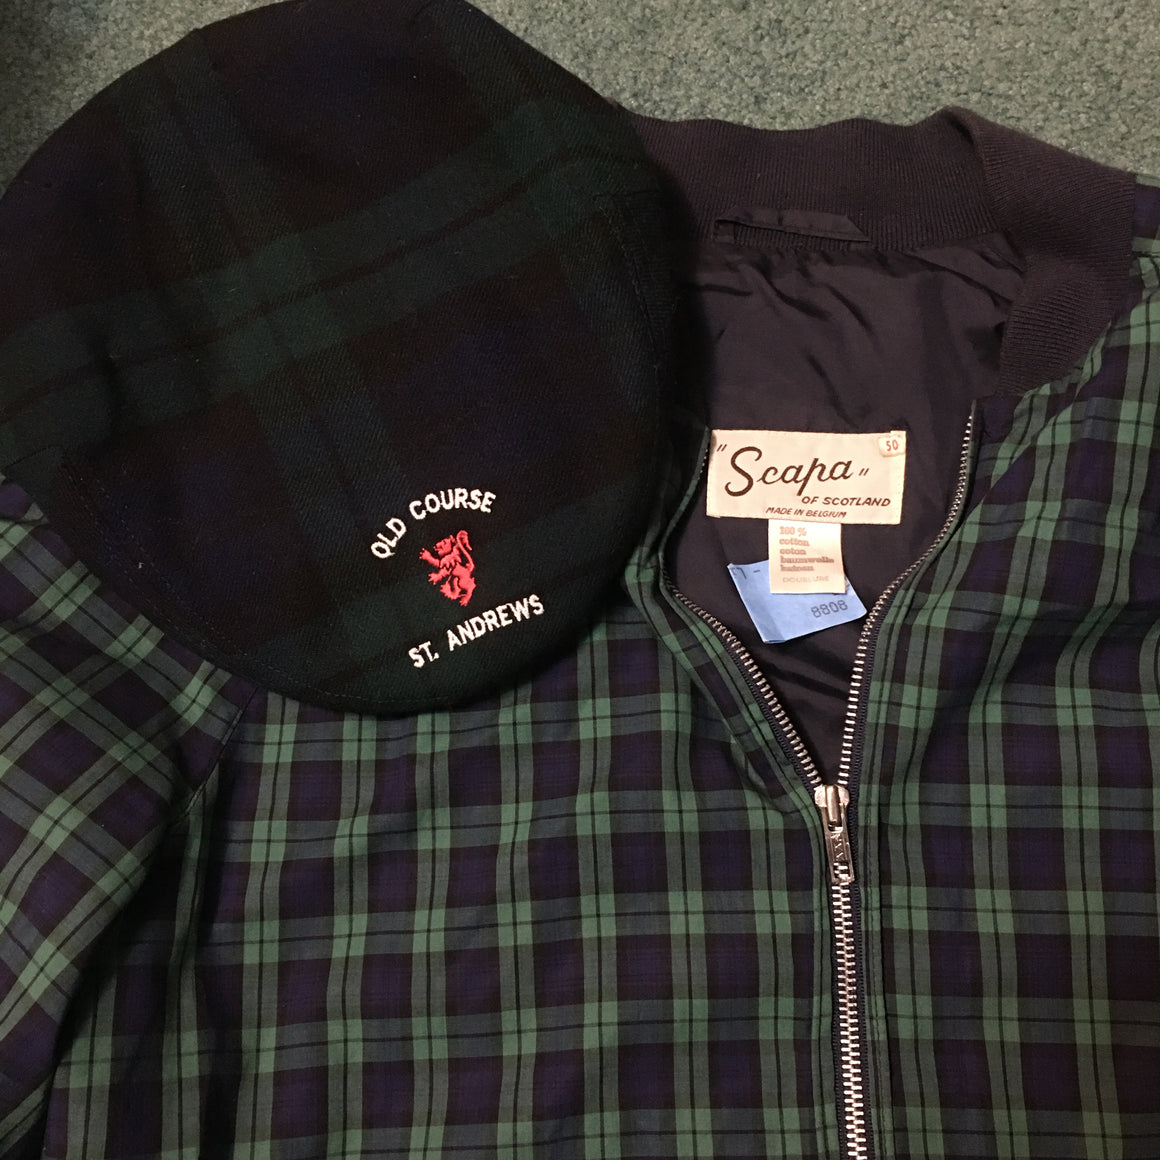 St Andrews hat and jacket